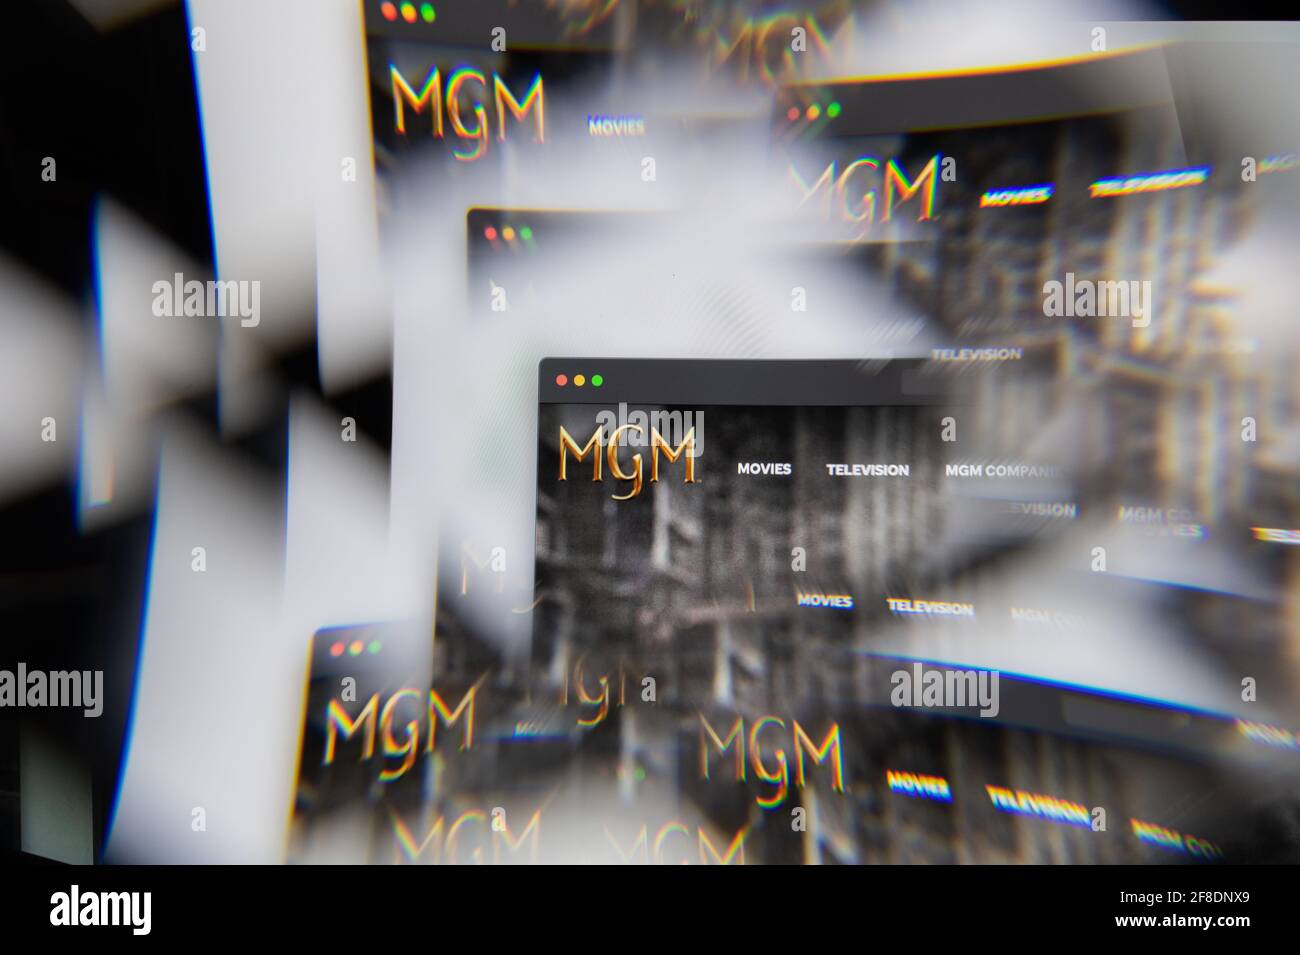 Milan, Italy - APRIL 10, 2021: MGM logo on laptop screen seen through an optical prism. Illustrative editorial image from MGM website. Stock Photo